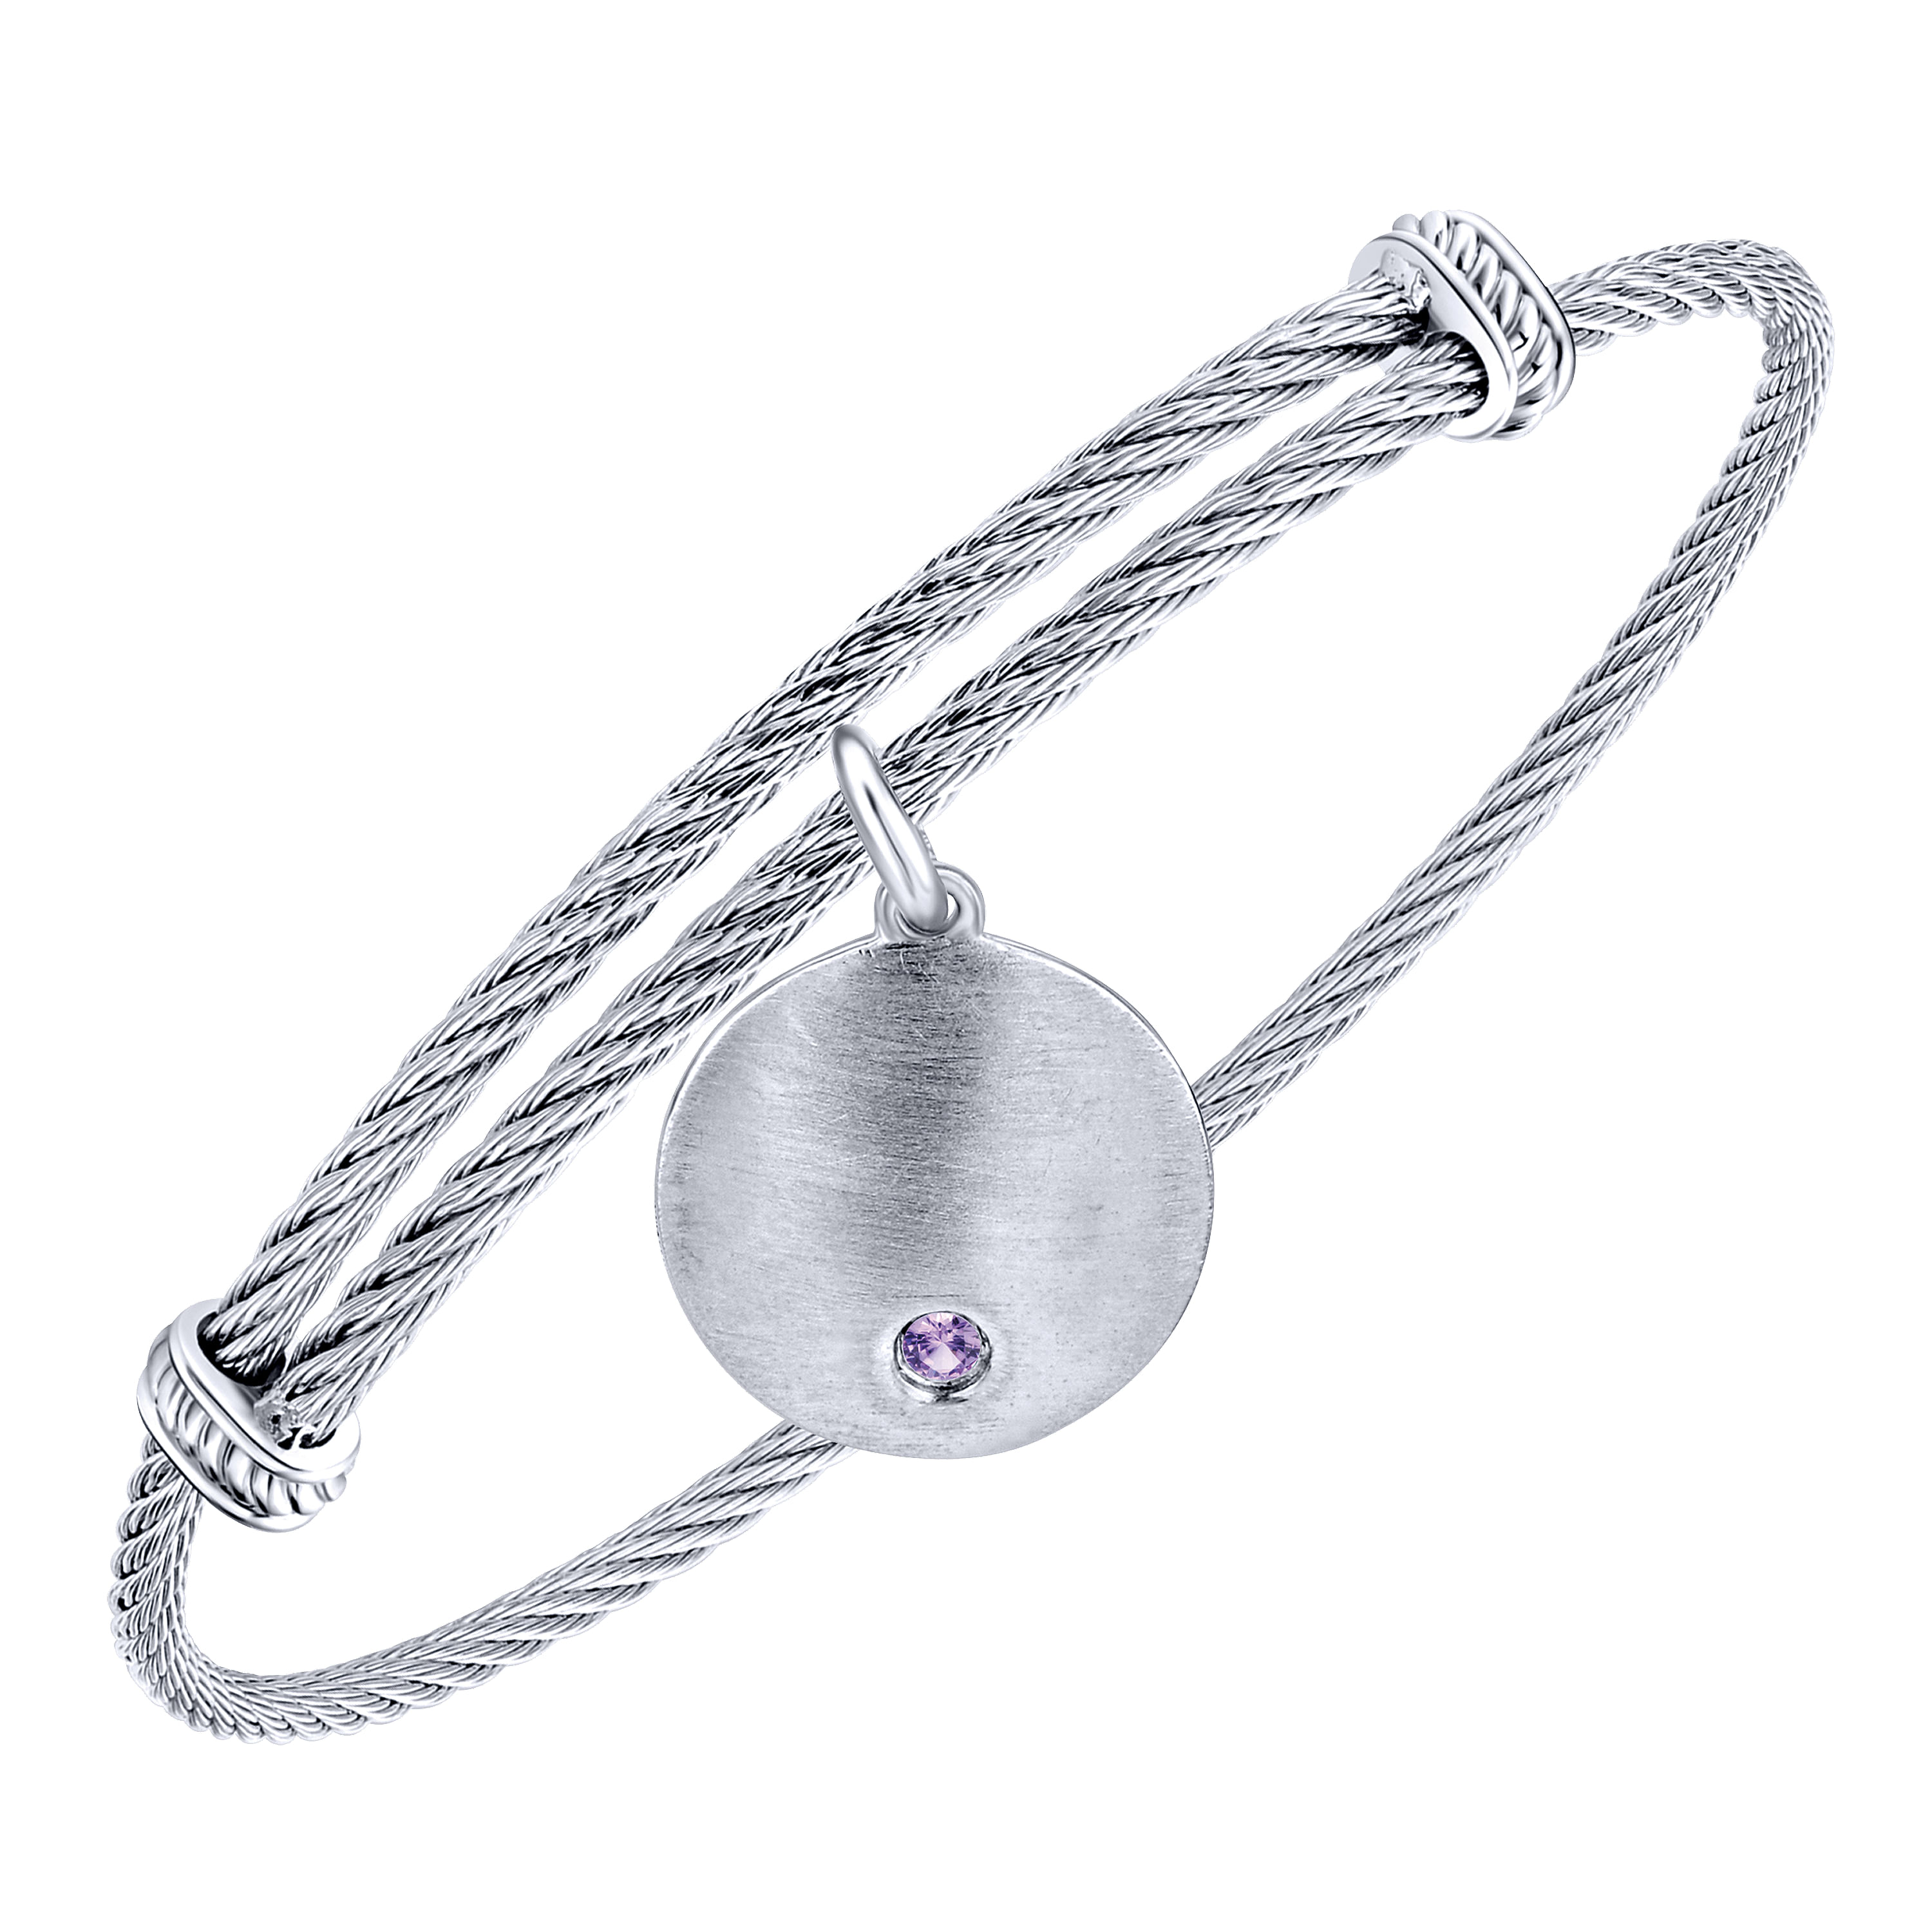 Adjustable Stainless Steel Bangle with Round Sterling Silver Alexandrite Stone Disc Charm